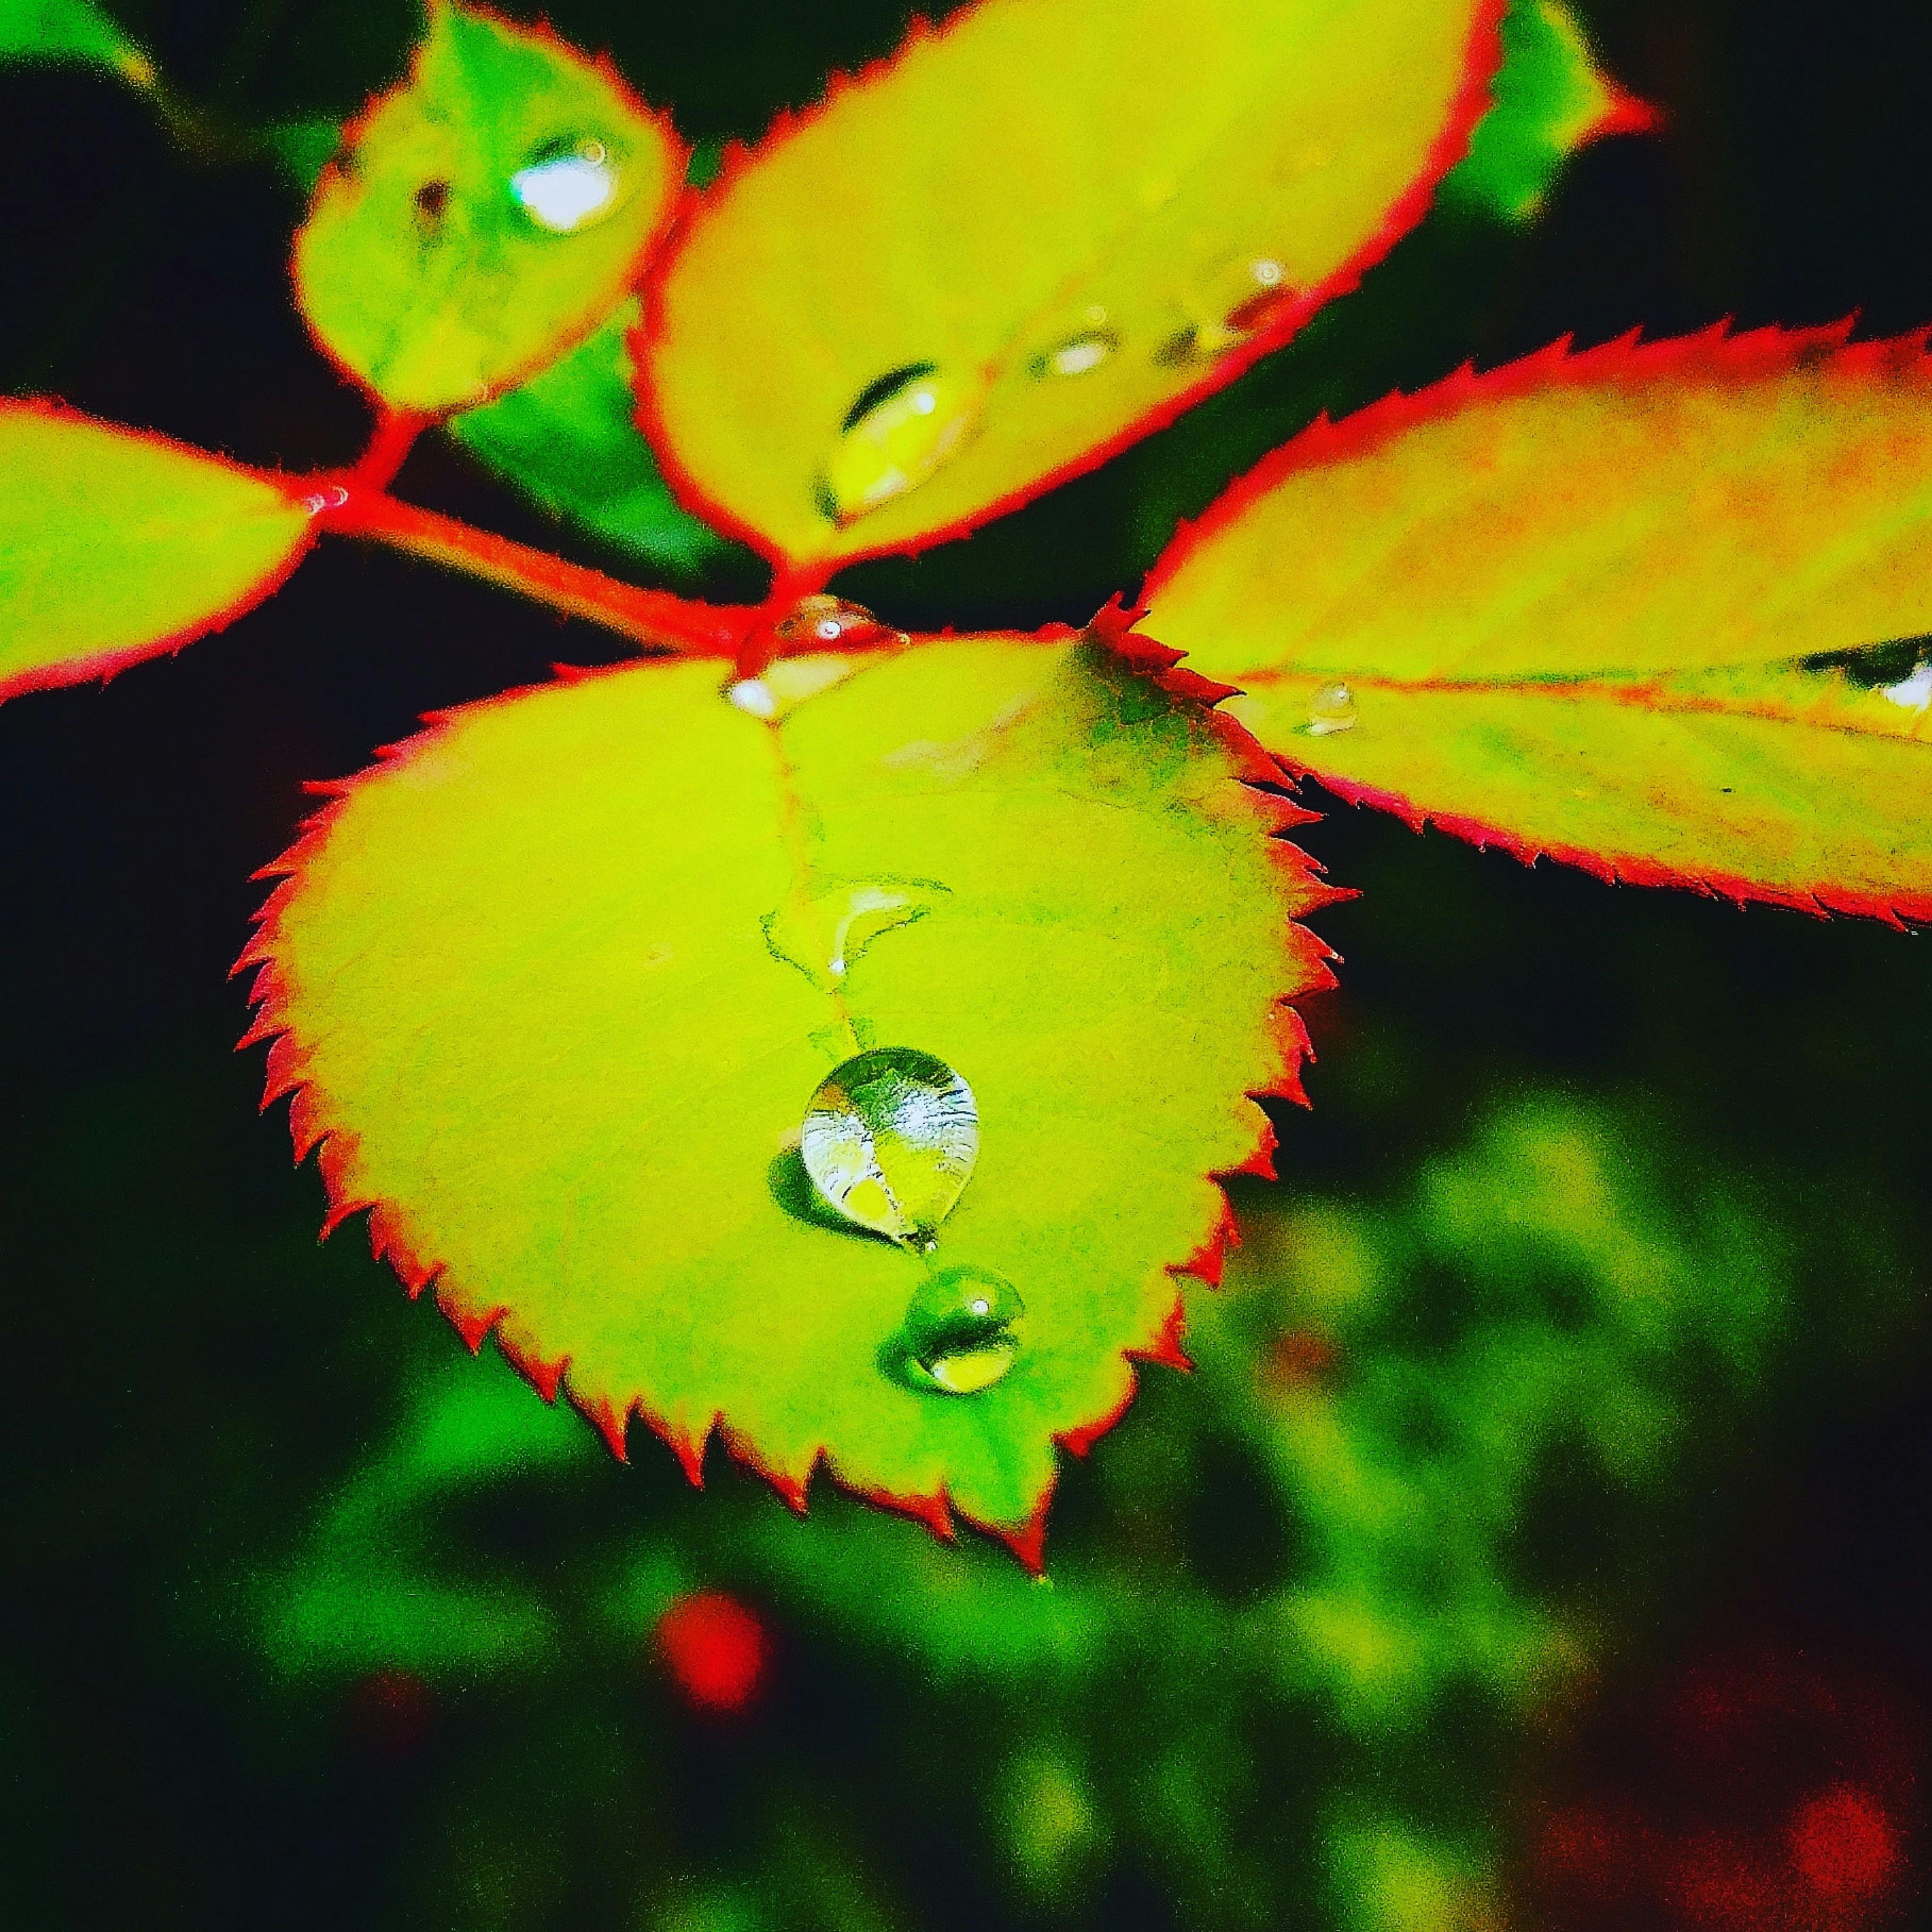 Free stock photo of #leaves #dew #rain #nature #red #naturelover